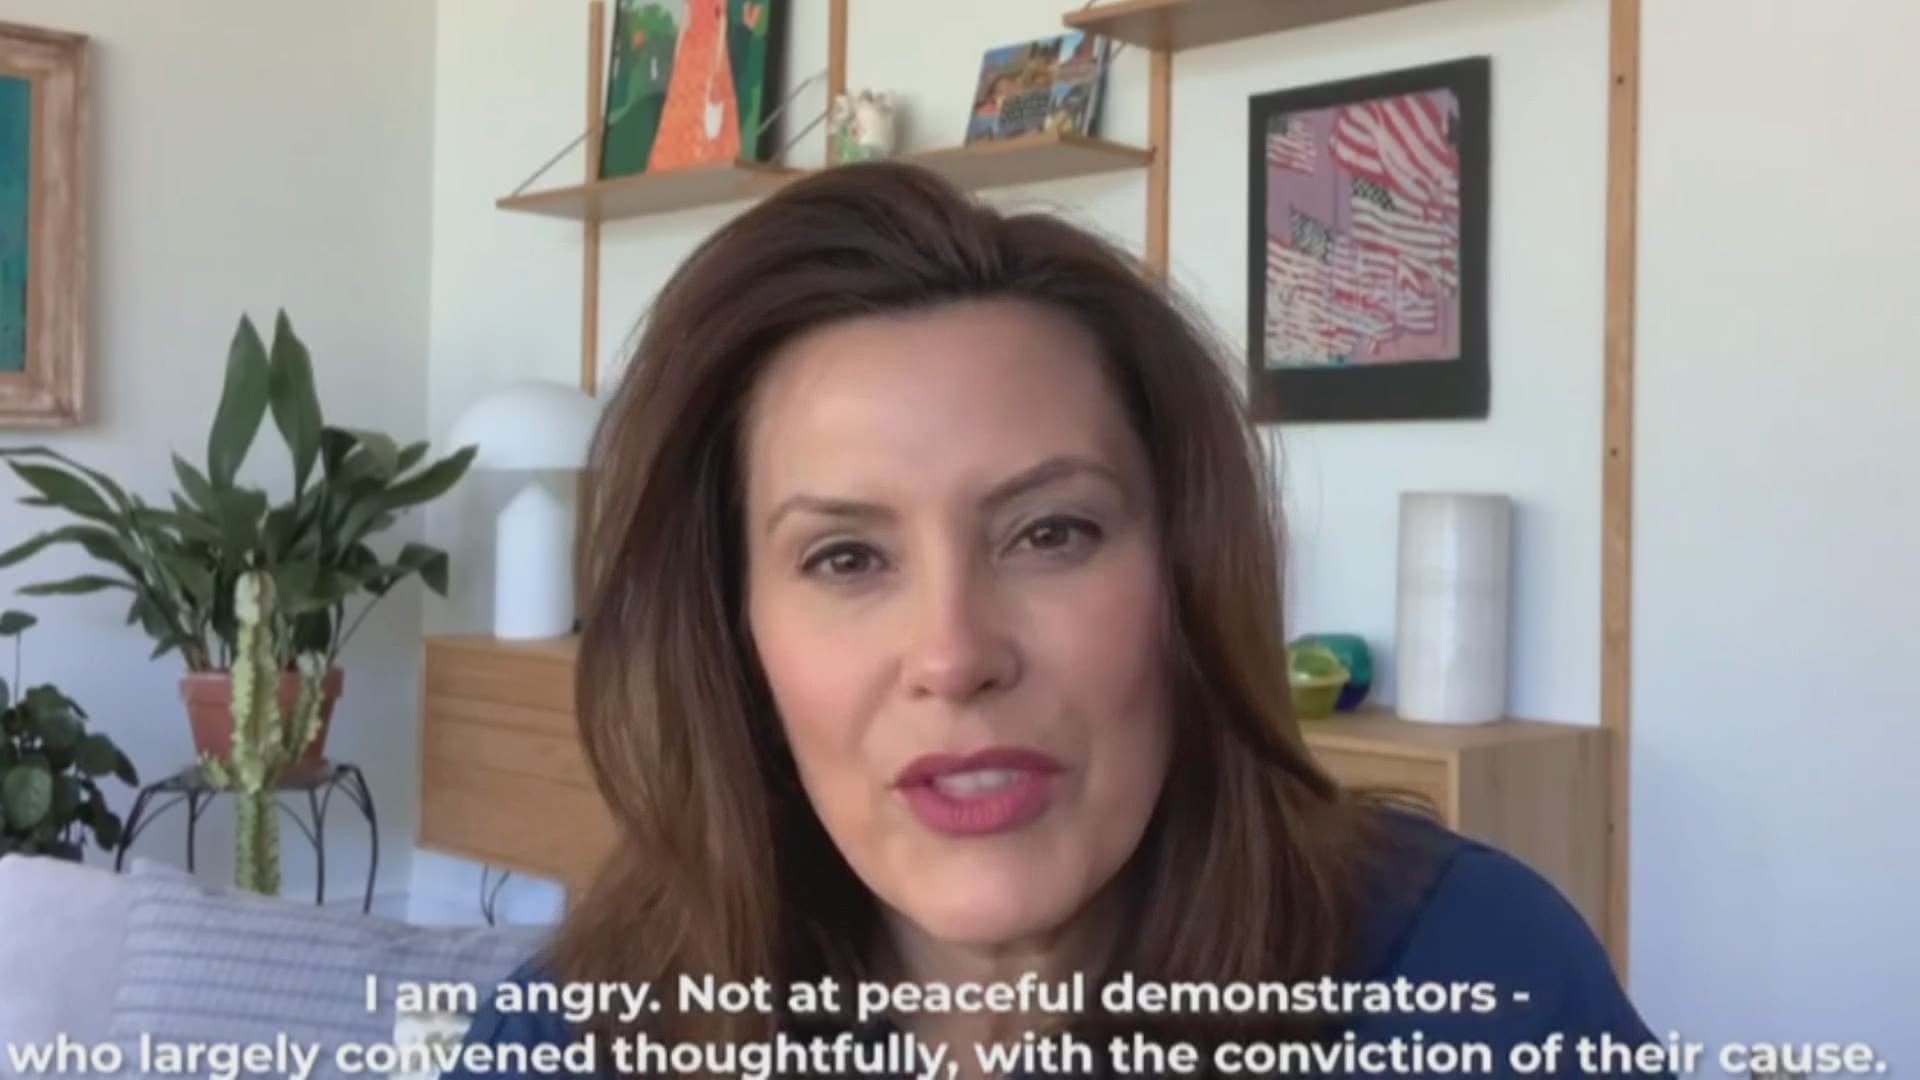 Governor Gretchen Whitmer spoke out  in response to the weekend's demonstrations.